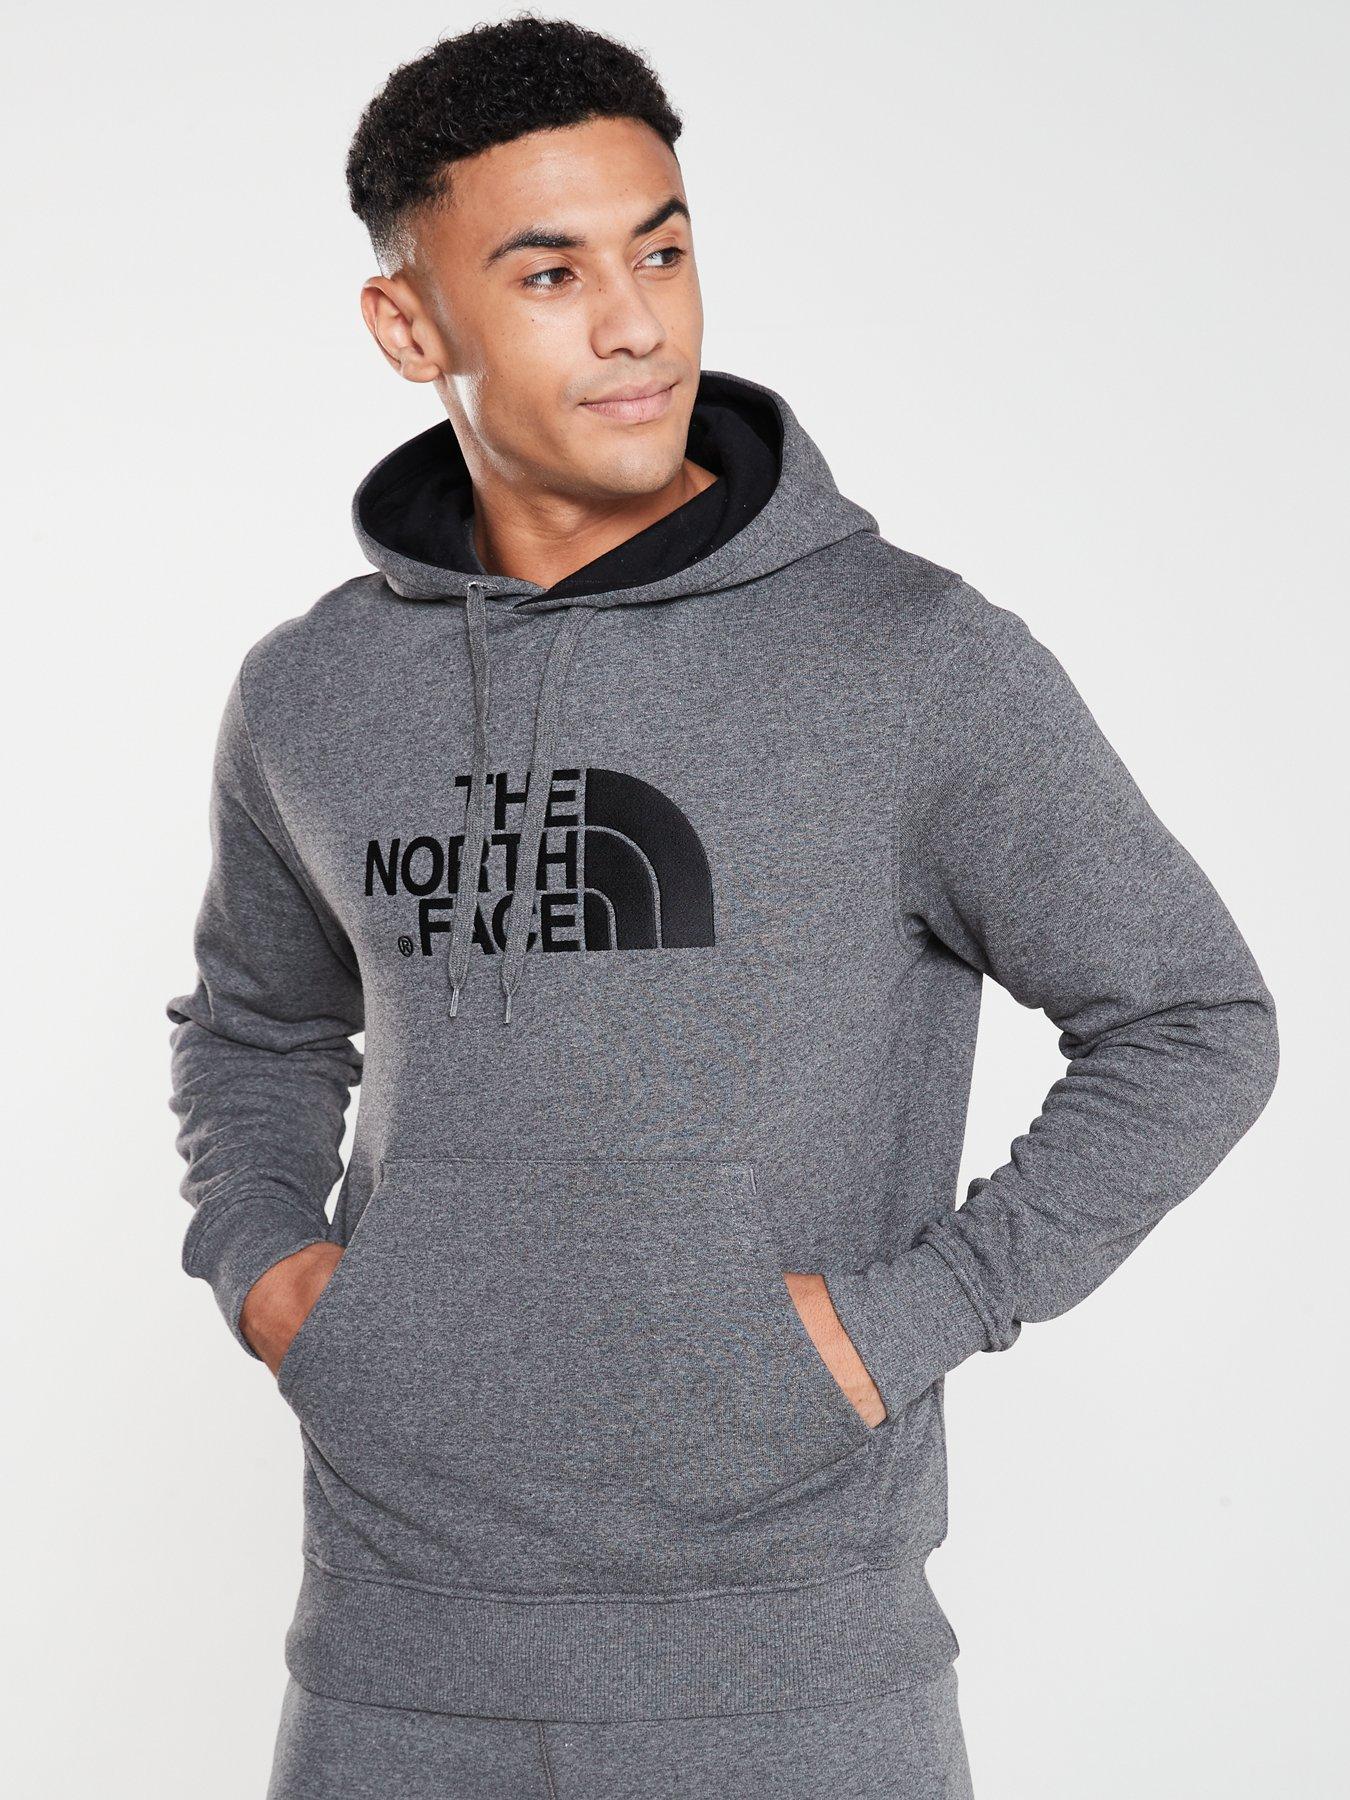 north face tracksuit mens